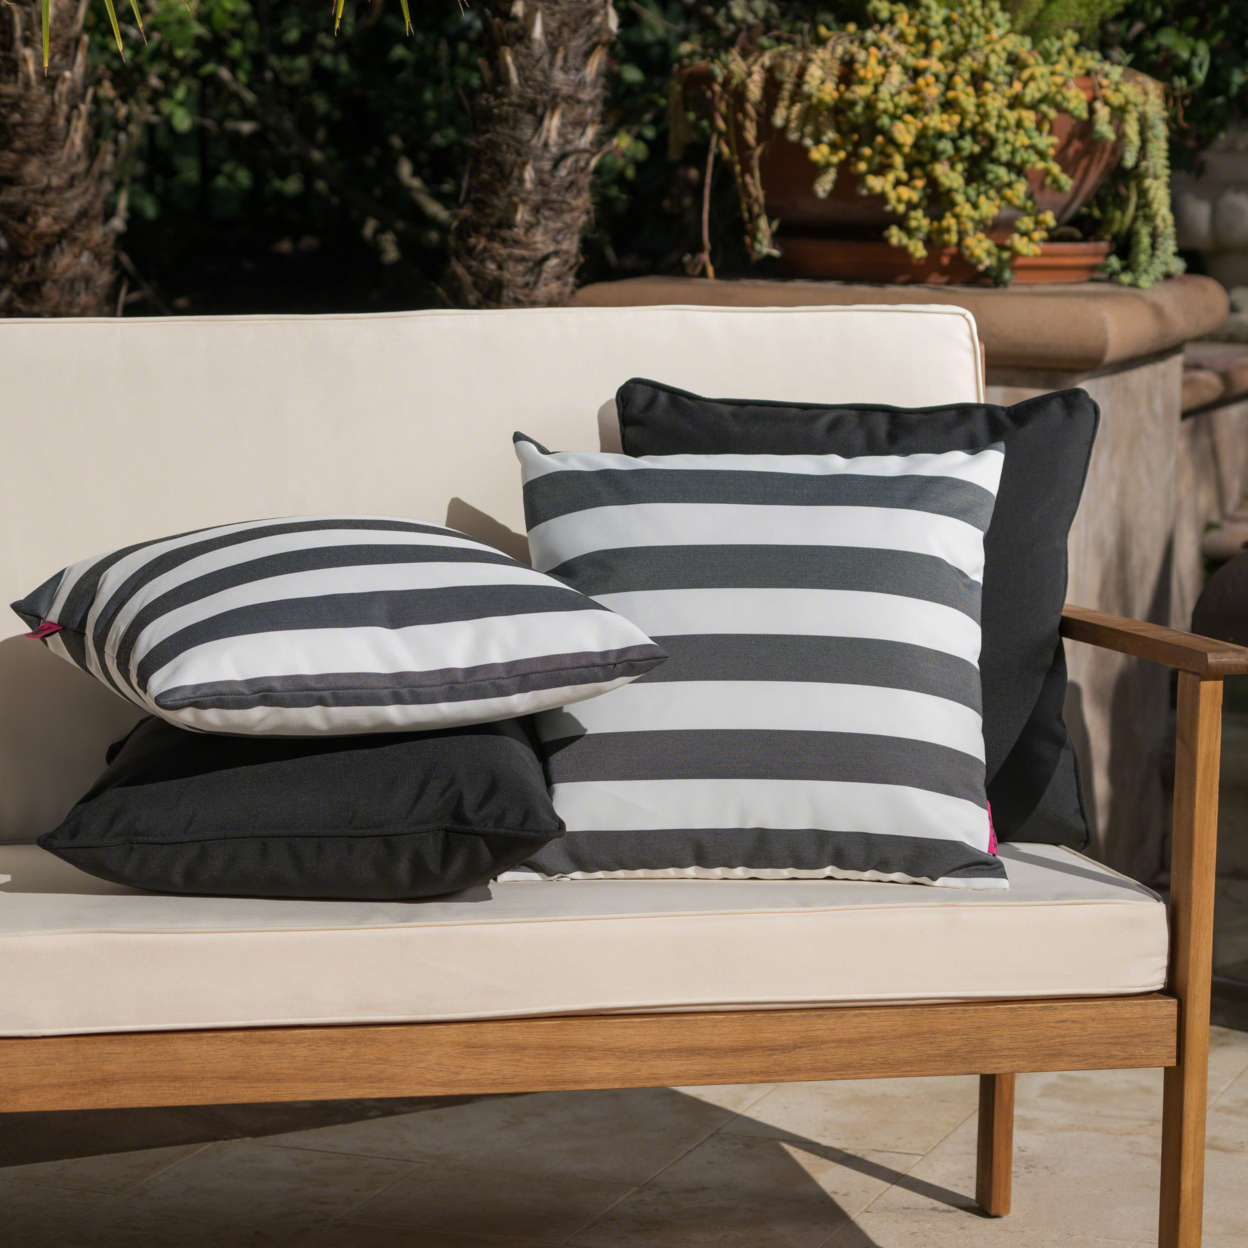 La Jolla Outdoor Striped Water Resistant Square Throw Pillows - Set Of 4 - Dark Teal/White - Zigzag